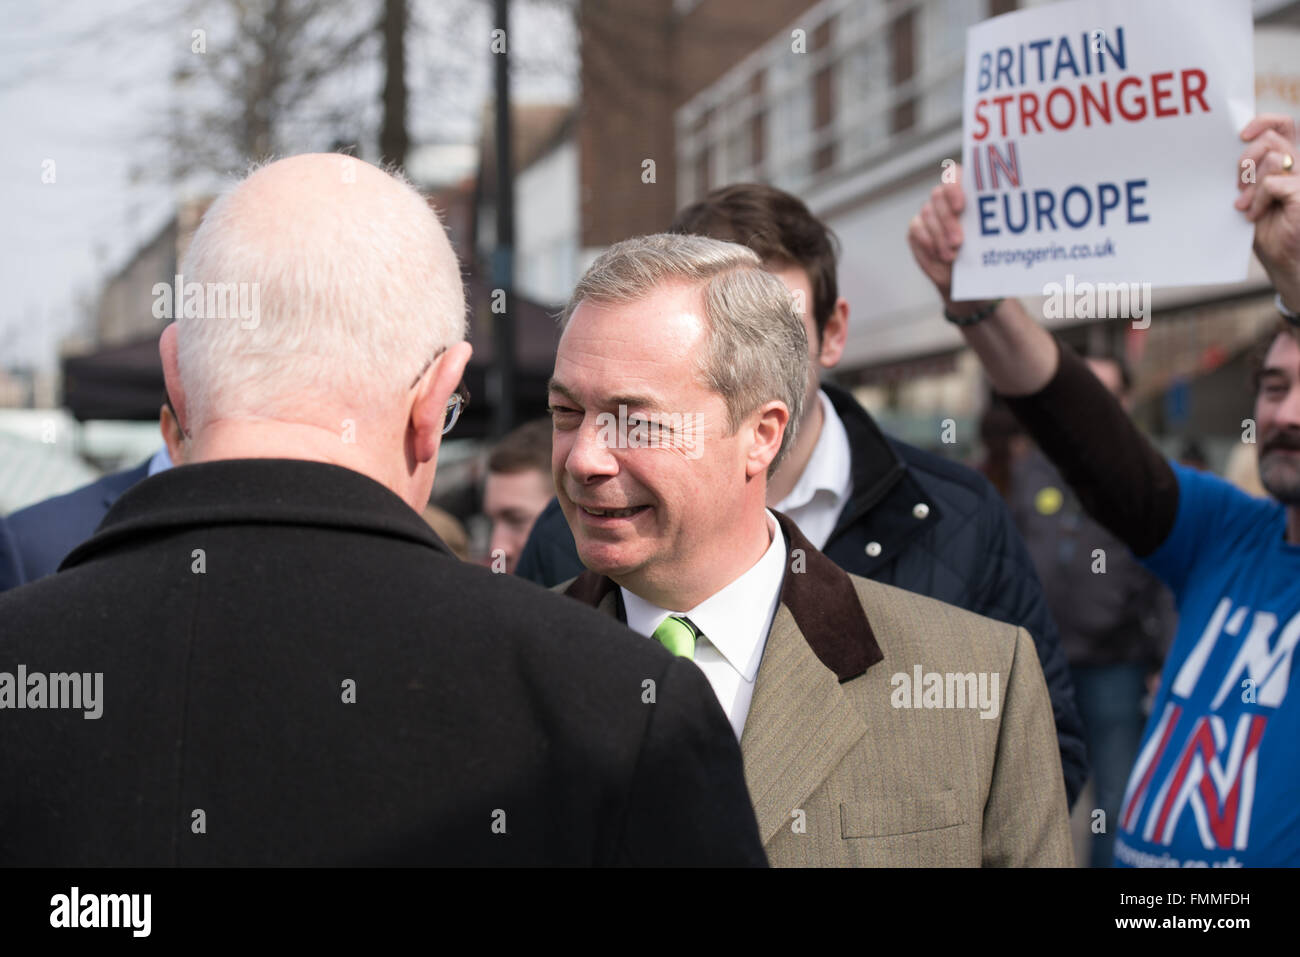 Romford, Essex, 12th March 2016, Nigel Farage MEP, Leader of UKIP campaigning in Romford, Essex on market day, with Andrew Rosindell MP in support of the UK withdrawal from the European Union. Stock Photo